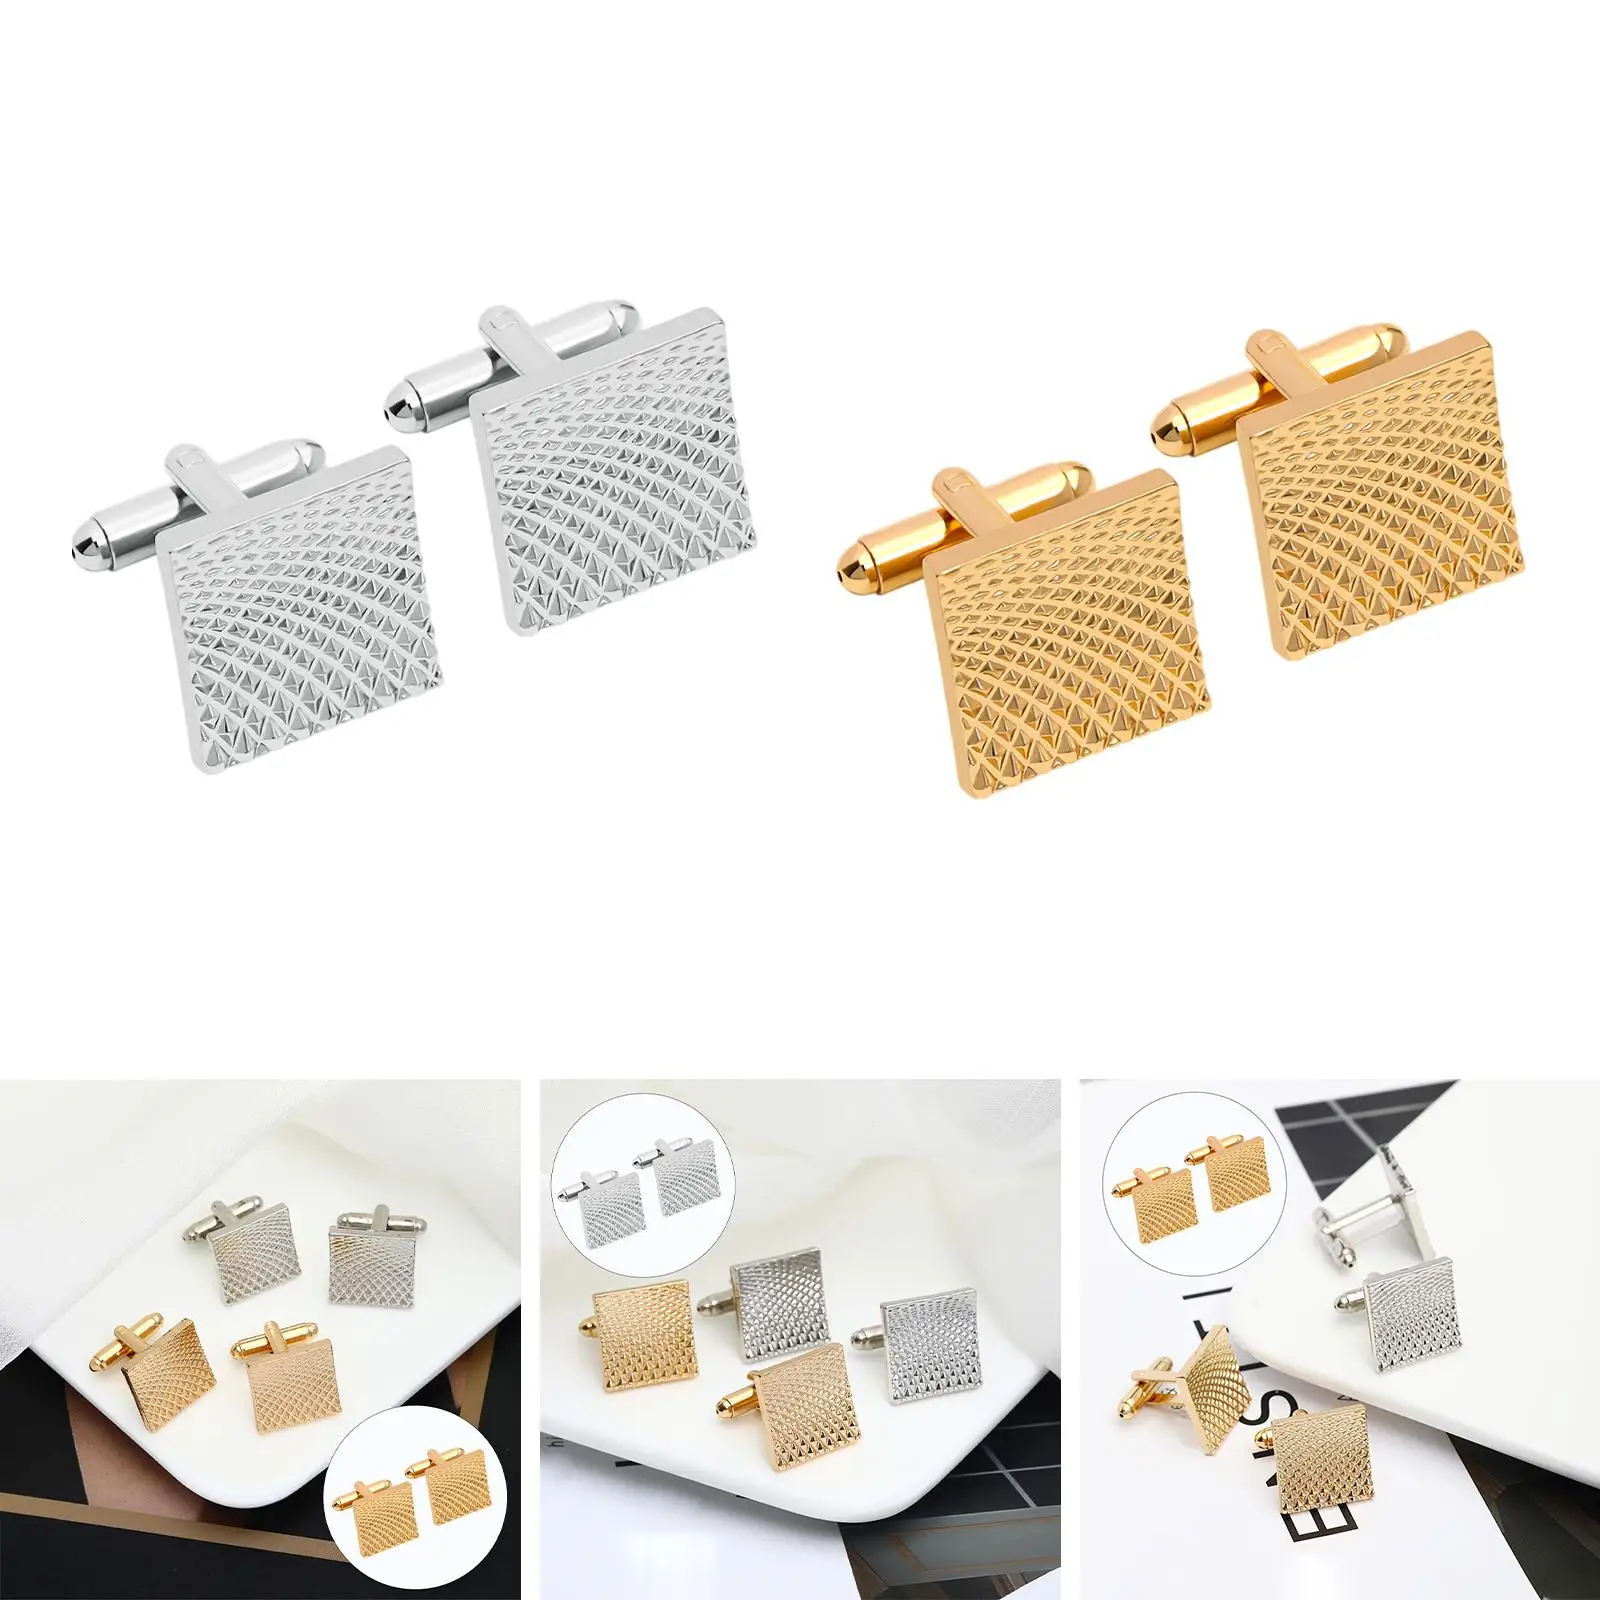 1  Cufflinks Gentleman Style Sturdy Stylish Quality Polished Durable Delicate Cuff Links for Shirt Wedding Suits Meeting Daily